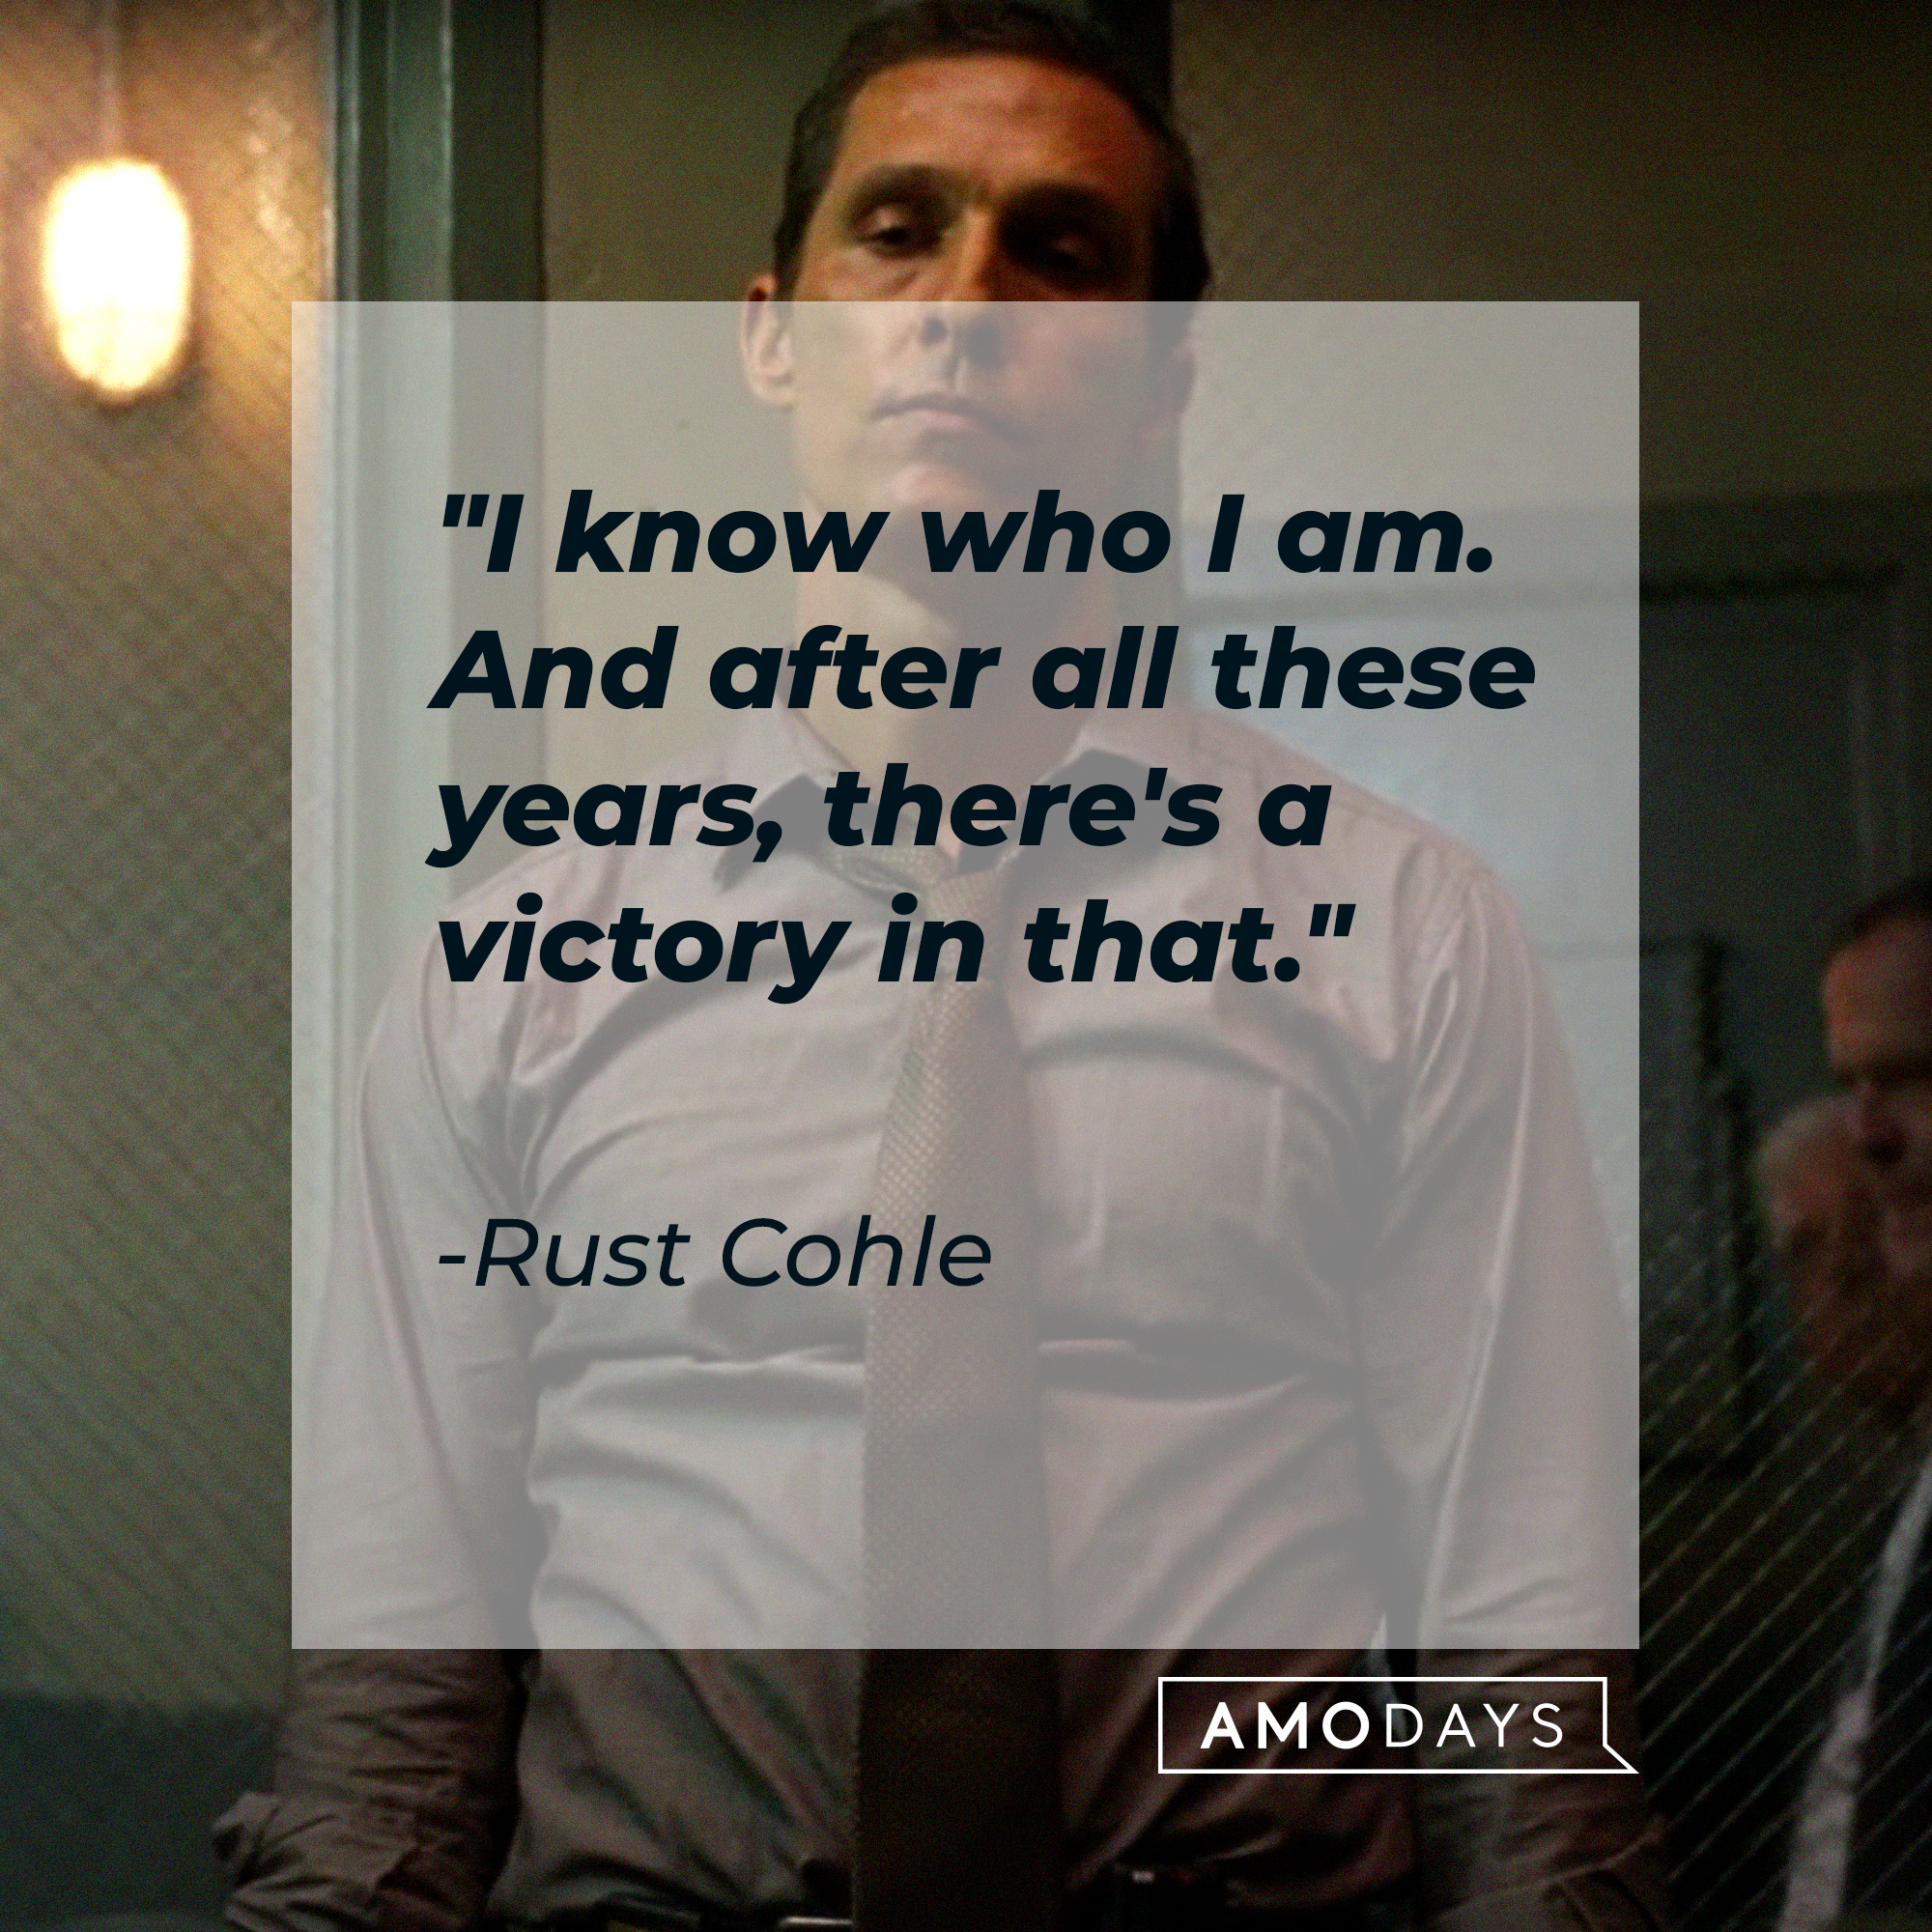 Rust Cohle's quote: "I know who I am. And after all these years, there's a victory in that." | Source: facebook.com/TrueDetective